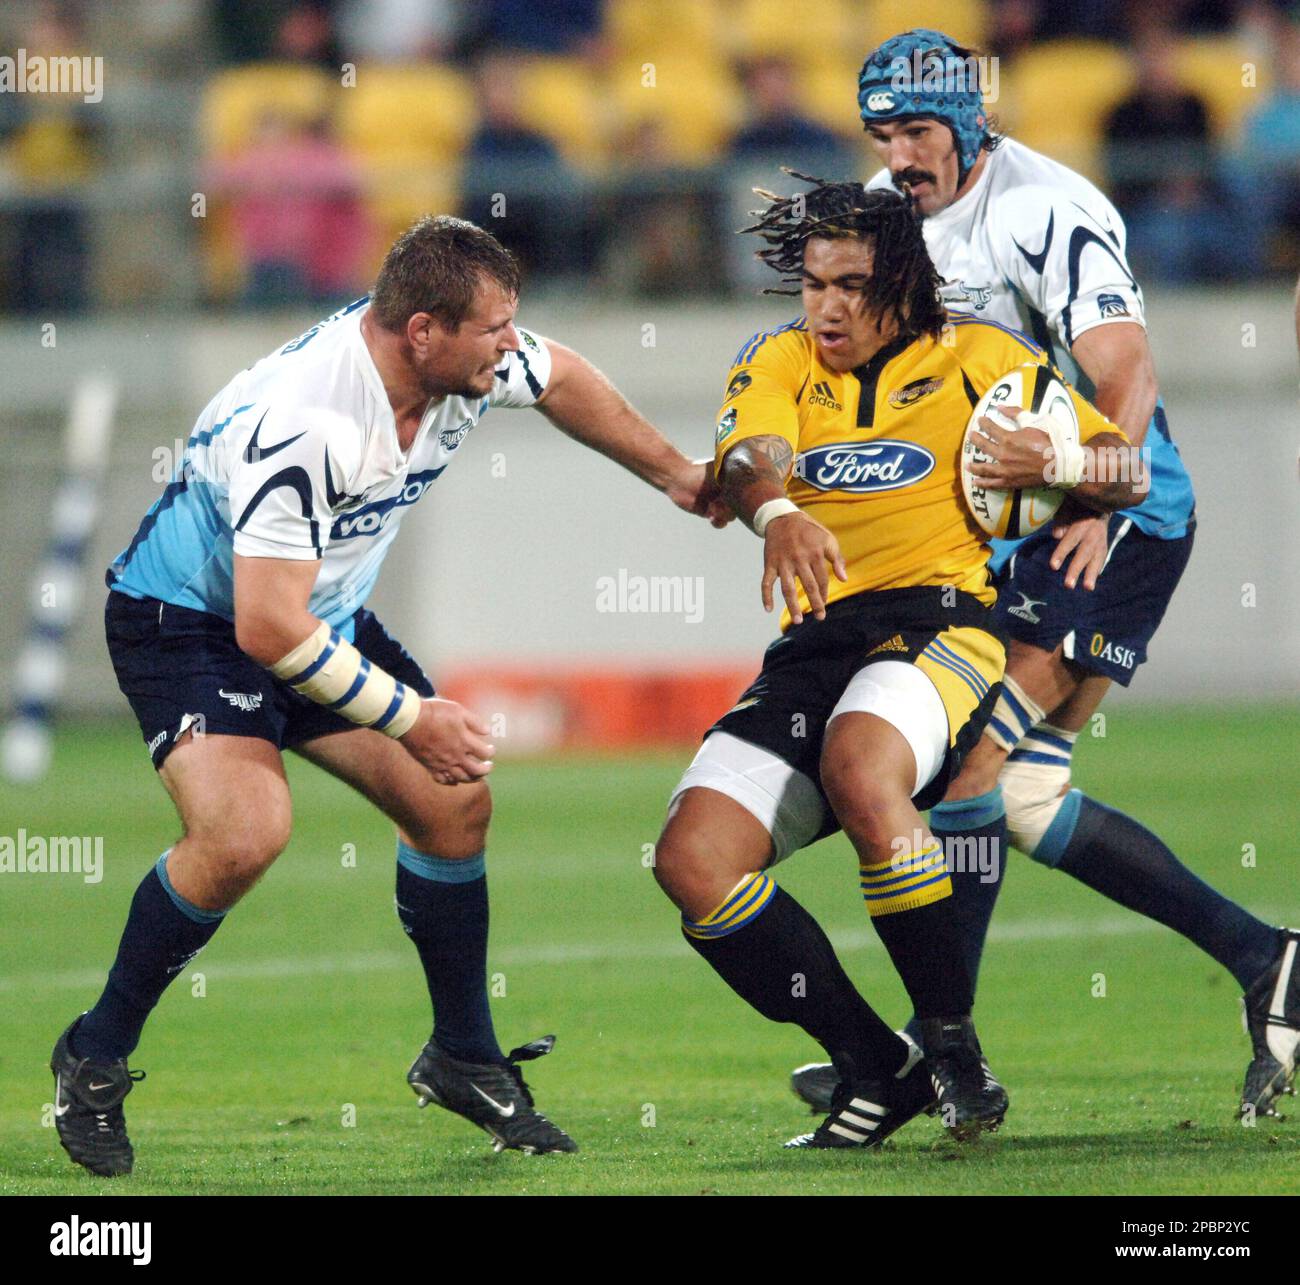 South African Bulls Rayno Gerber, left, attempts to grab New Zealand Hurricanes Maa Nonu in the Super 14 rugby match at Westpac Stadium, Wellington, New Zealand, Saturday, March 31, 2007